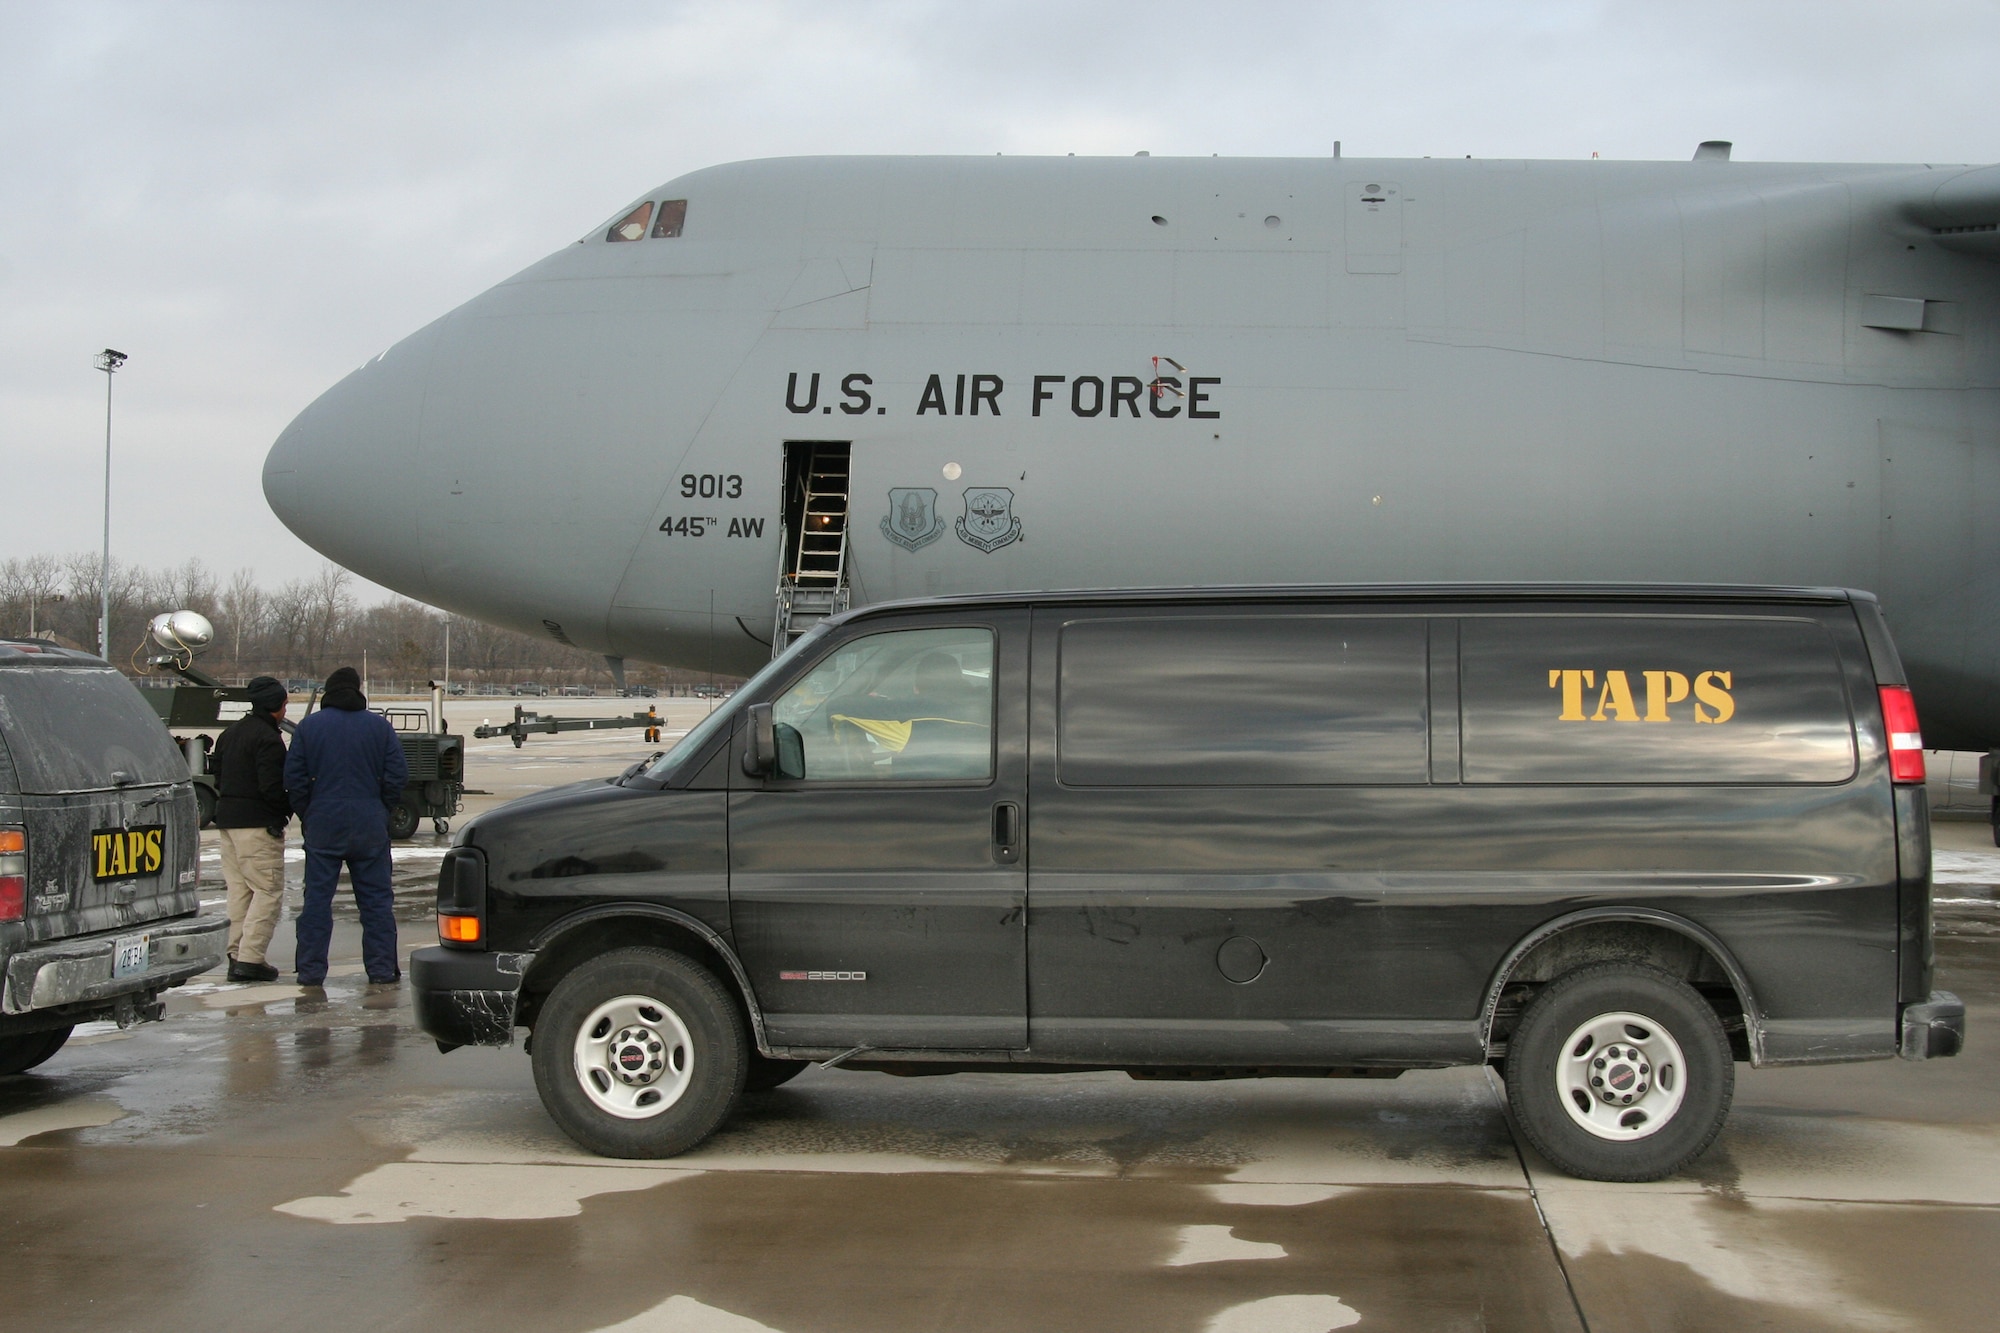 WRIGHT-PATTERSON AFB, Ohio - The Atlantic Paranormal Society (TAPS) van sits in front of a 445th Airlift Wing C-5. The popular Sci Fi Channel T.V. show Ghost Hunters is filming their show in several buildings at Wright-Patterson AFB and filmed some footage of the 445th Airlift Wing's C-5 Galaxy Jan. 15, 2008 to help enhance the Air Force base setting for the show. (U.S. Air Force photo/Laura Darden)